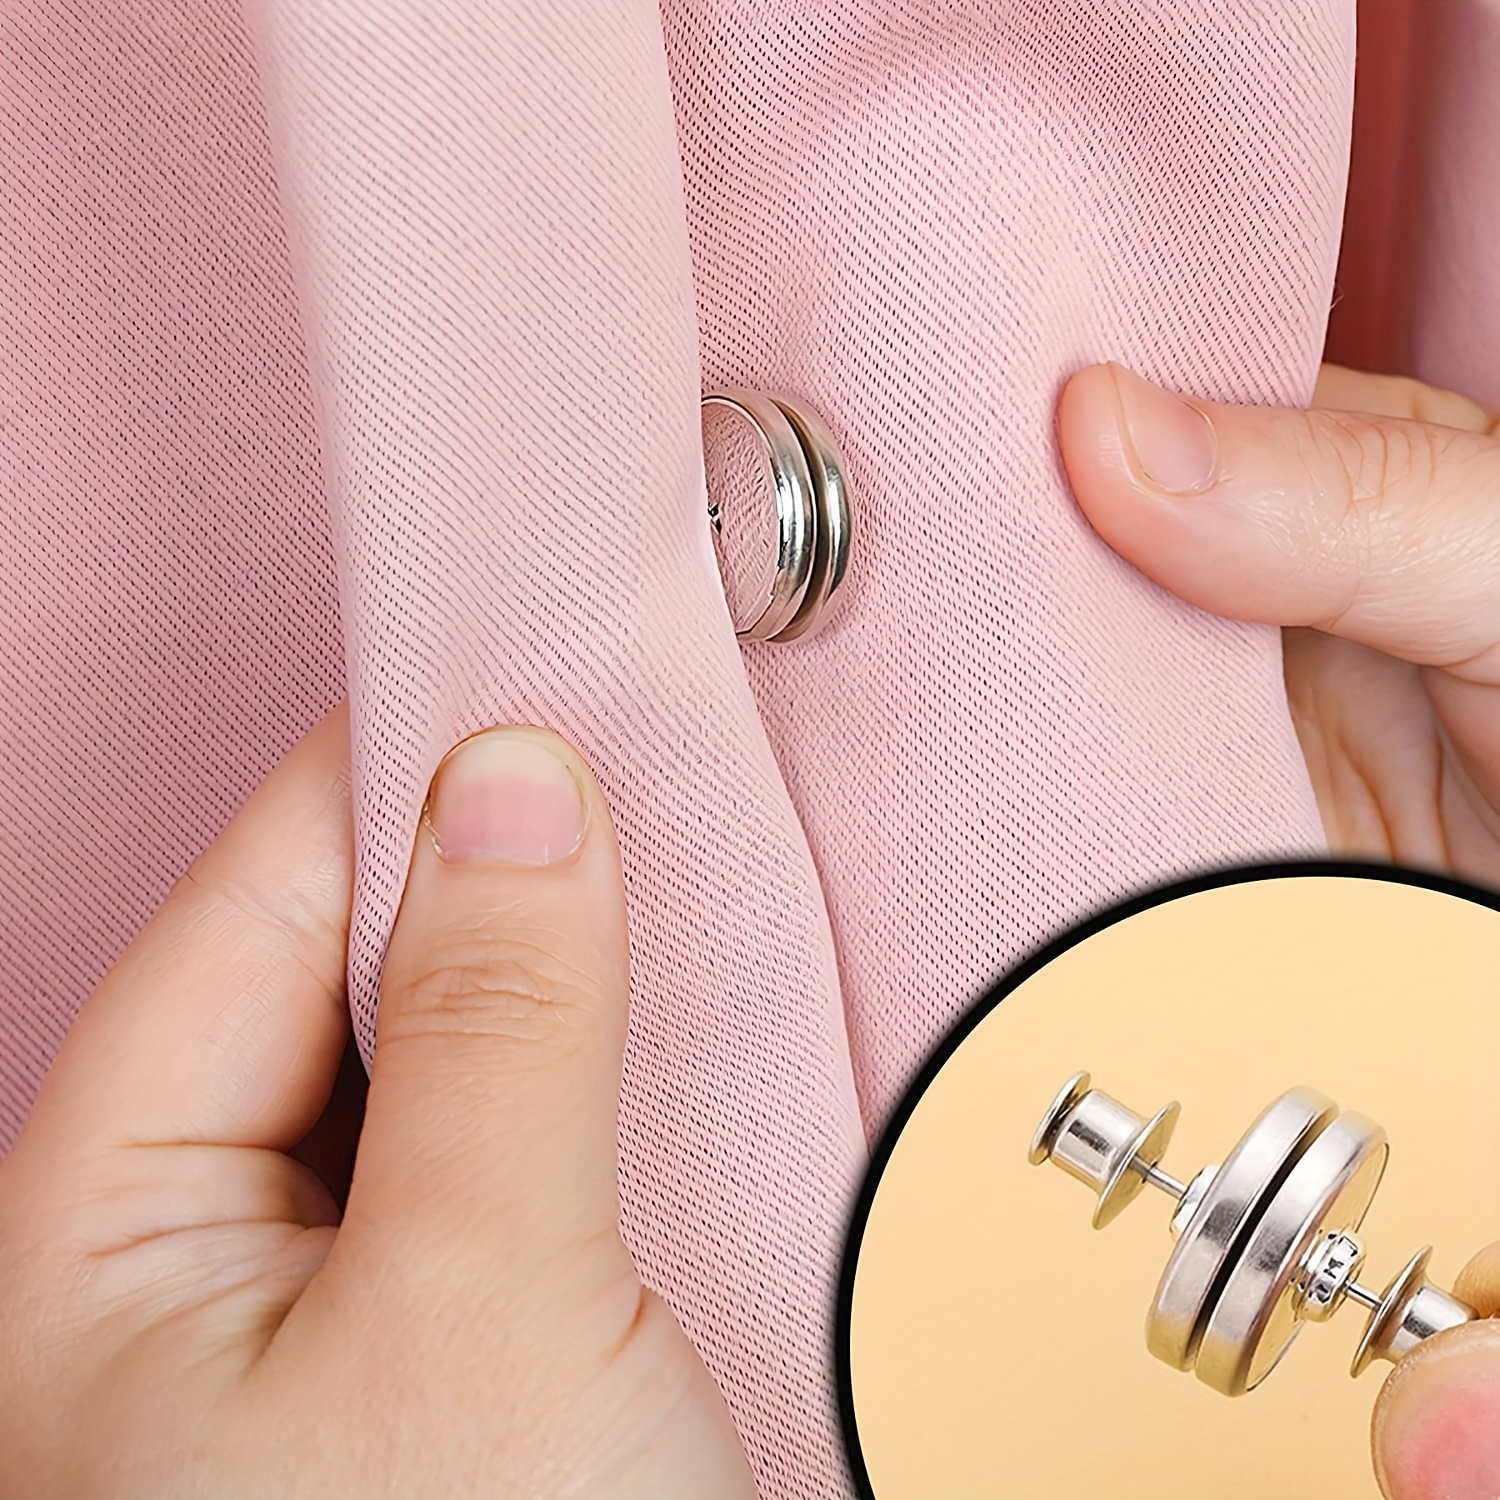 1Pair Curtain Magnets Closure with Tack Curtain Weights Magnets Button  Curtain Magnetic Holdback Button to Prevent Light from Leaking & Curtains  from Being Blown Around